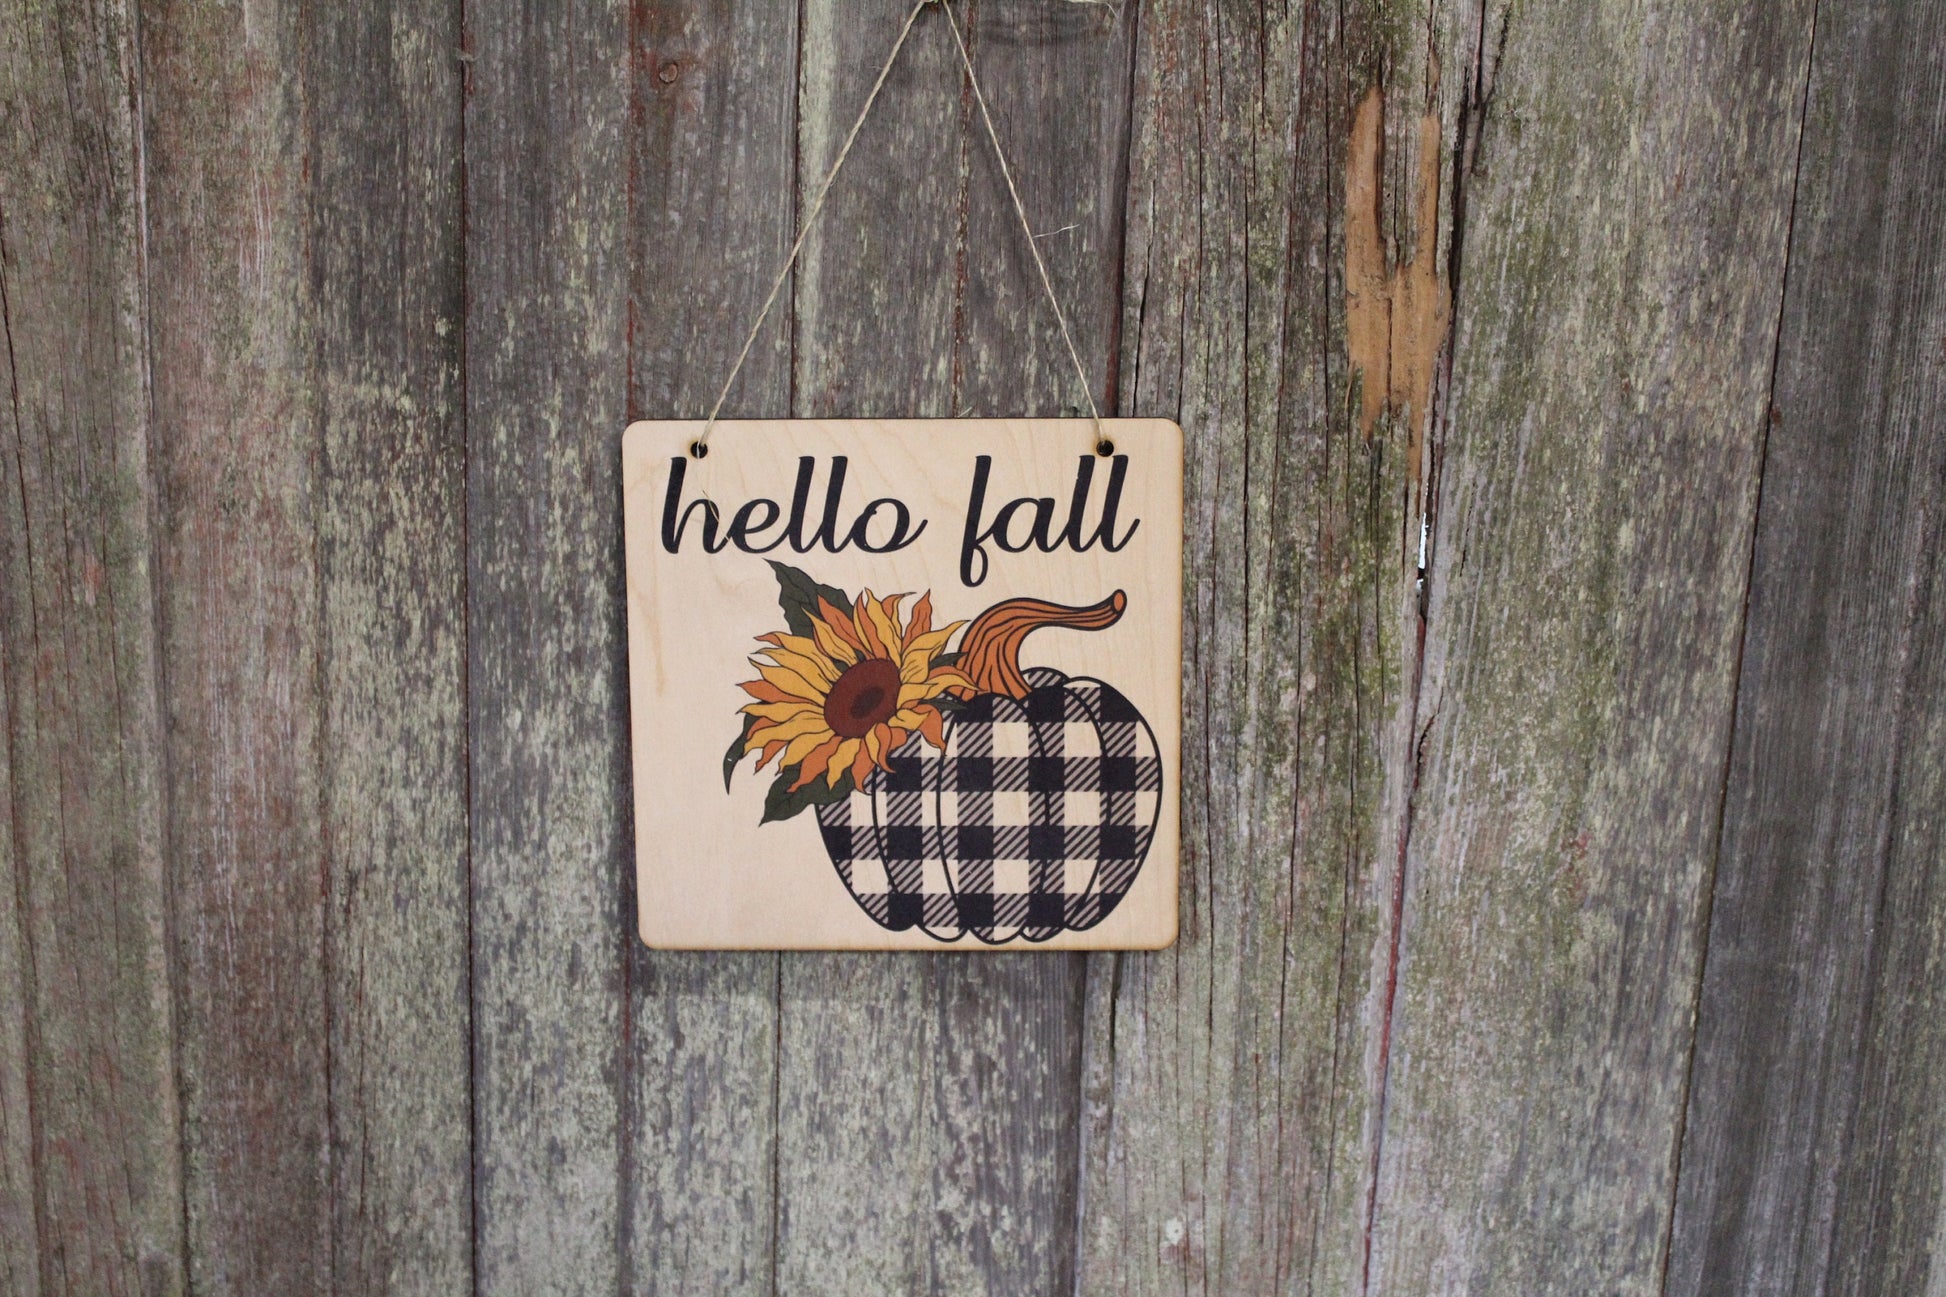 Plaid Pumpkin Wood Sign Sunflower Hello Fall Harvest Wall Decor Autumn Wall Hanging Wooden Rustic Country